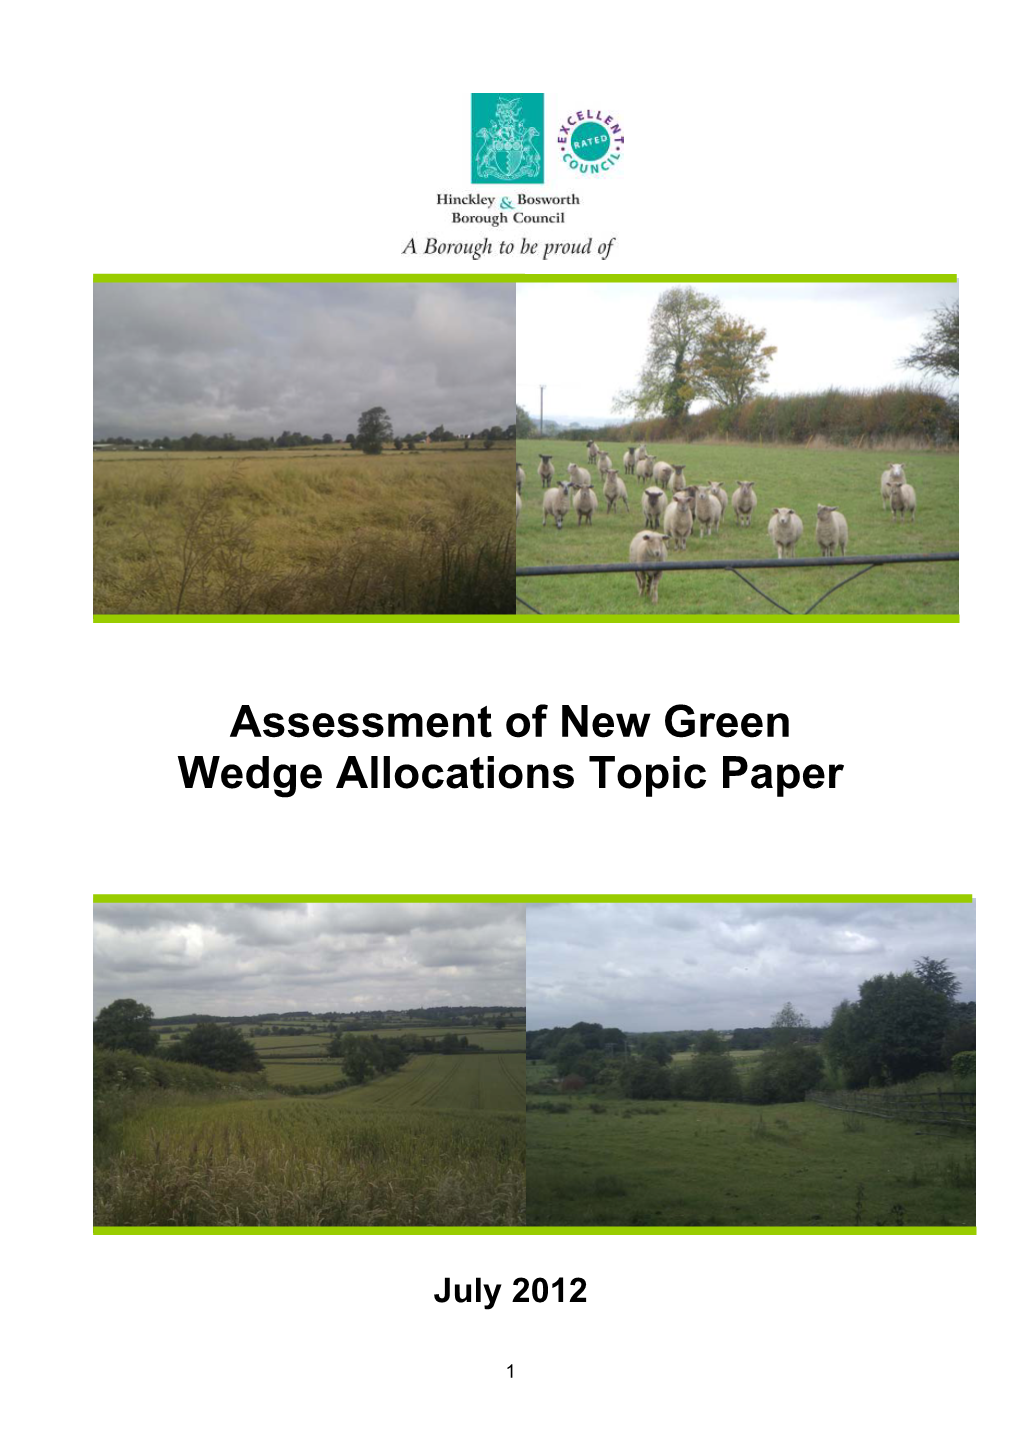 Assessment of New Green Wedge Allocations Topic Paper 2012